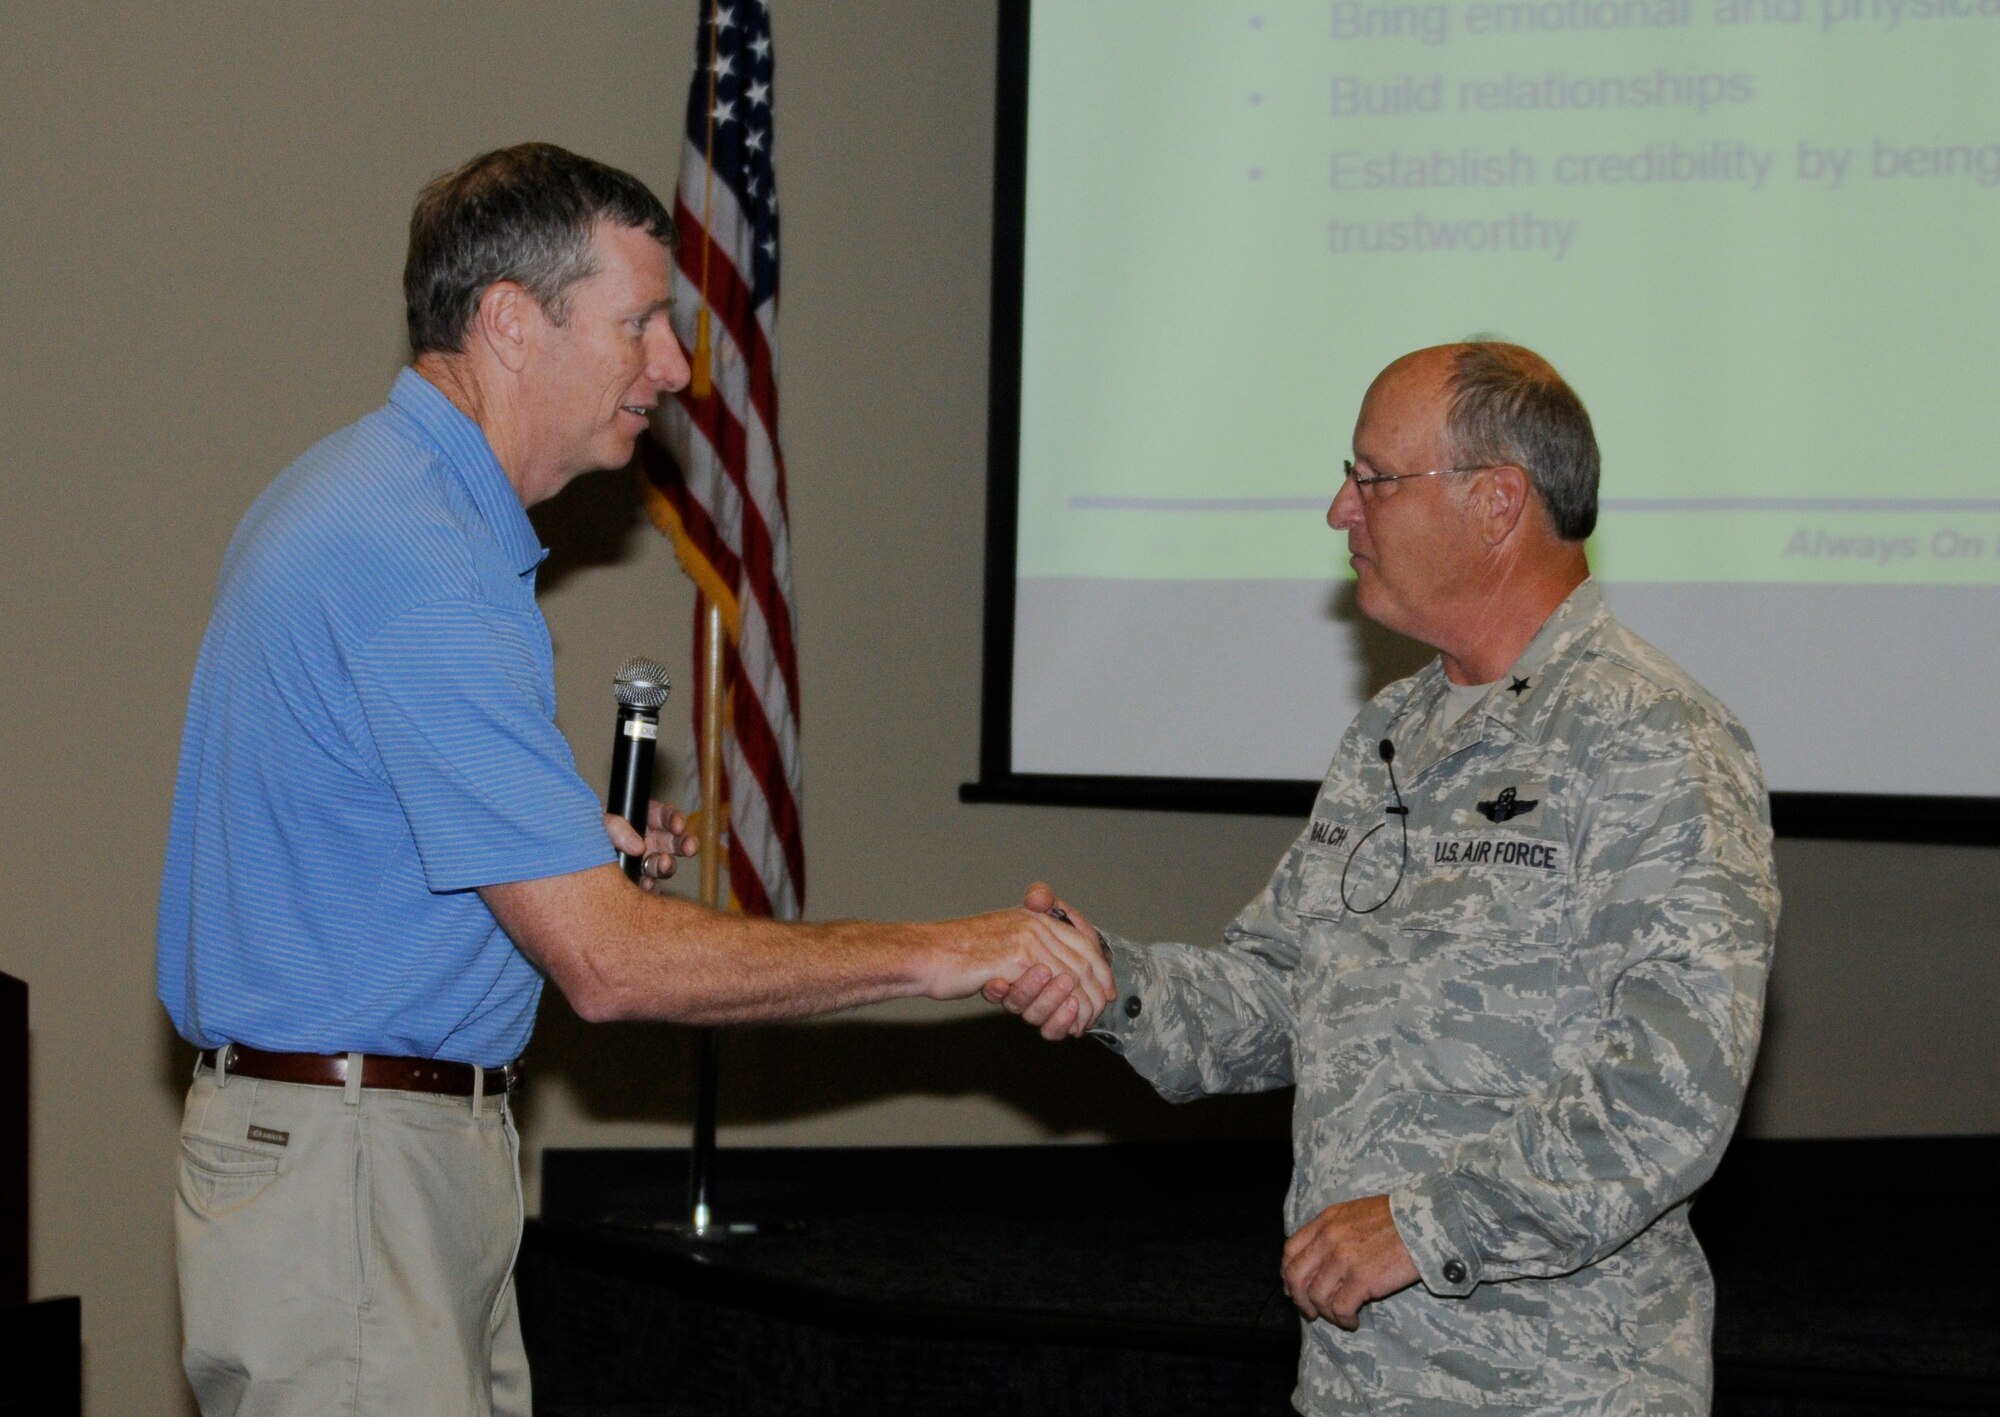 Retired Col. Mark Anderson, former 188th Wing commander, presentes a coin to Brig. Gen. Dwight Balch, commander of the Arkansas Air National Guard, as a token of appreciation at Ebbing Air National Guard Base, Ark., June 5, 2015. Anderson thanked Balch for his leadership and mentorship during his time as the 188th’s commander. Balch will retire June 6, and has served as the Arkansas ANG commander since May 2011. (U.S. Air National Guard photo by Staff Sgt. Hannah Dickerson/Released)